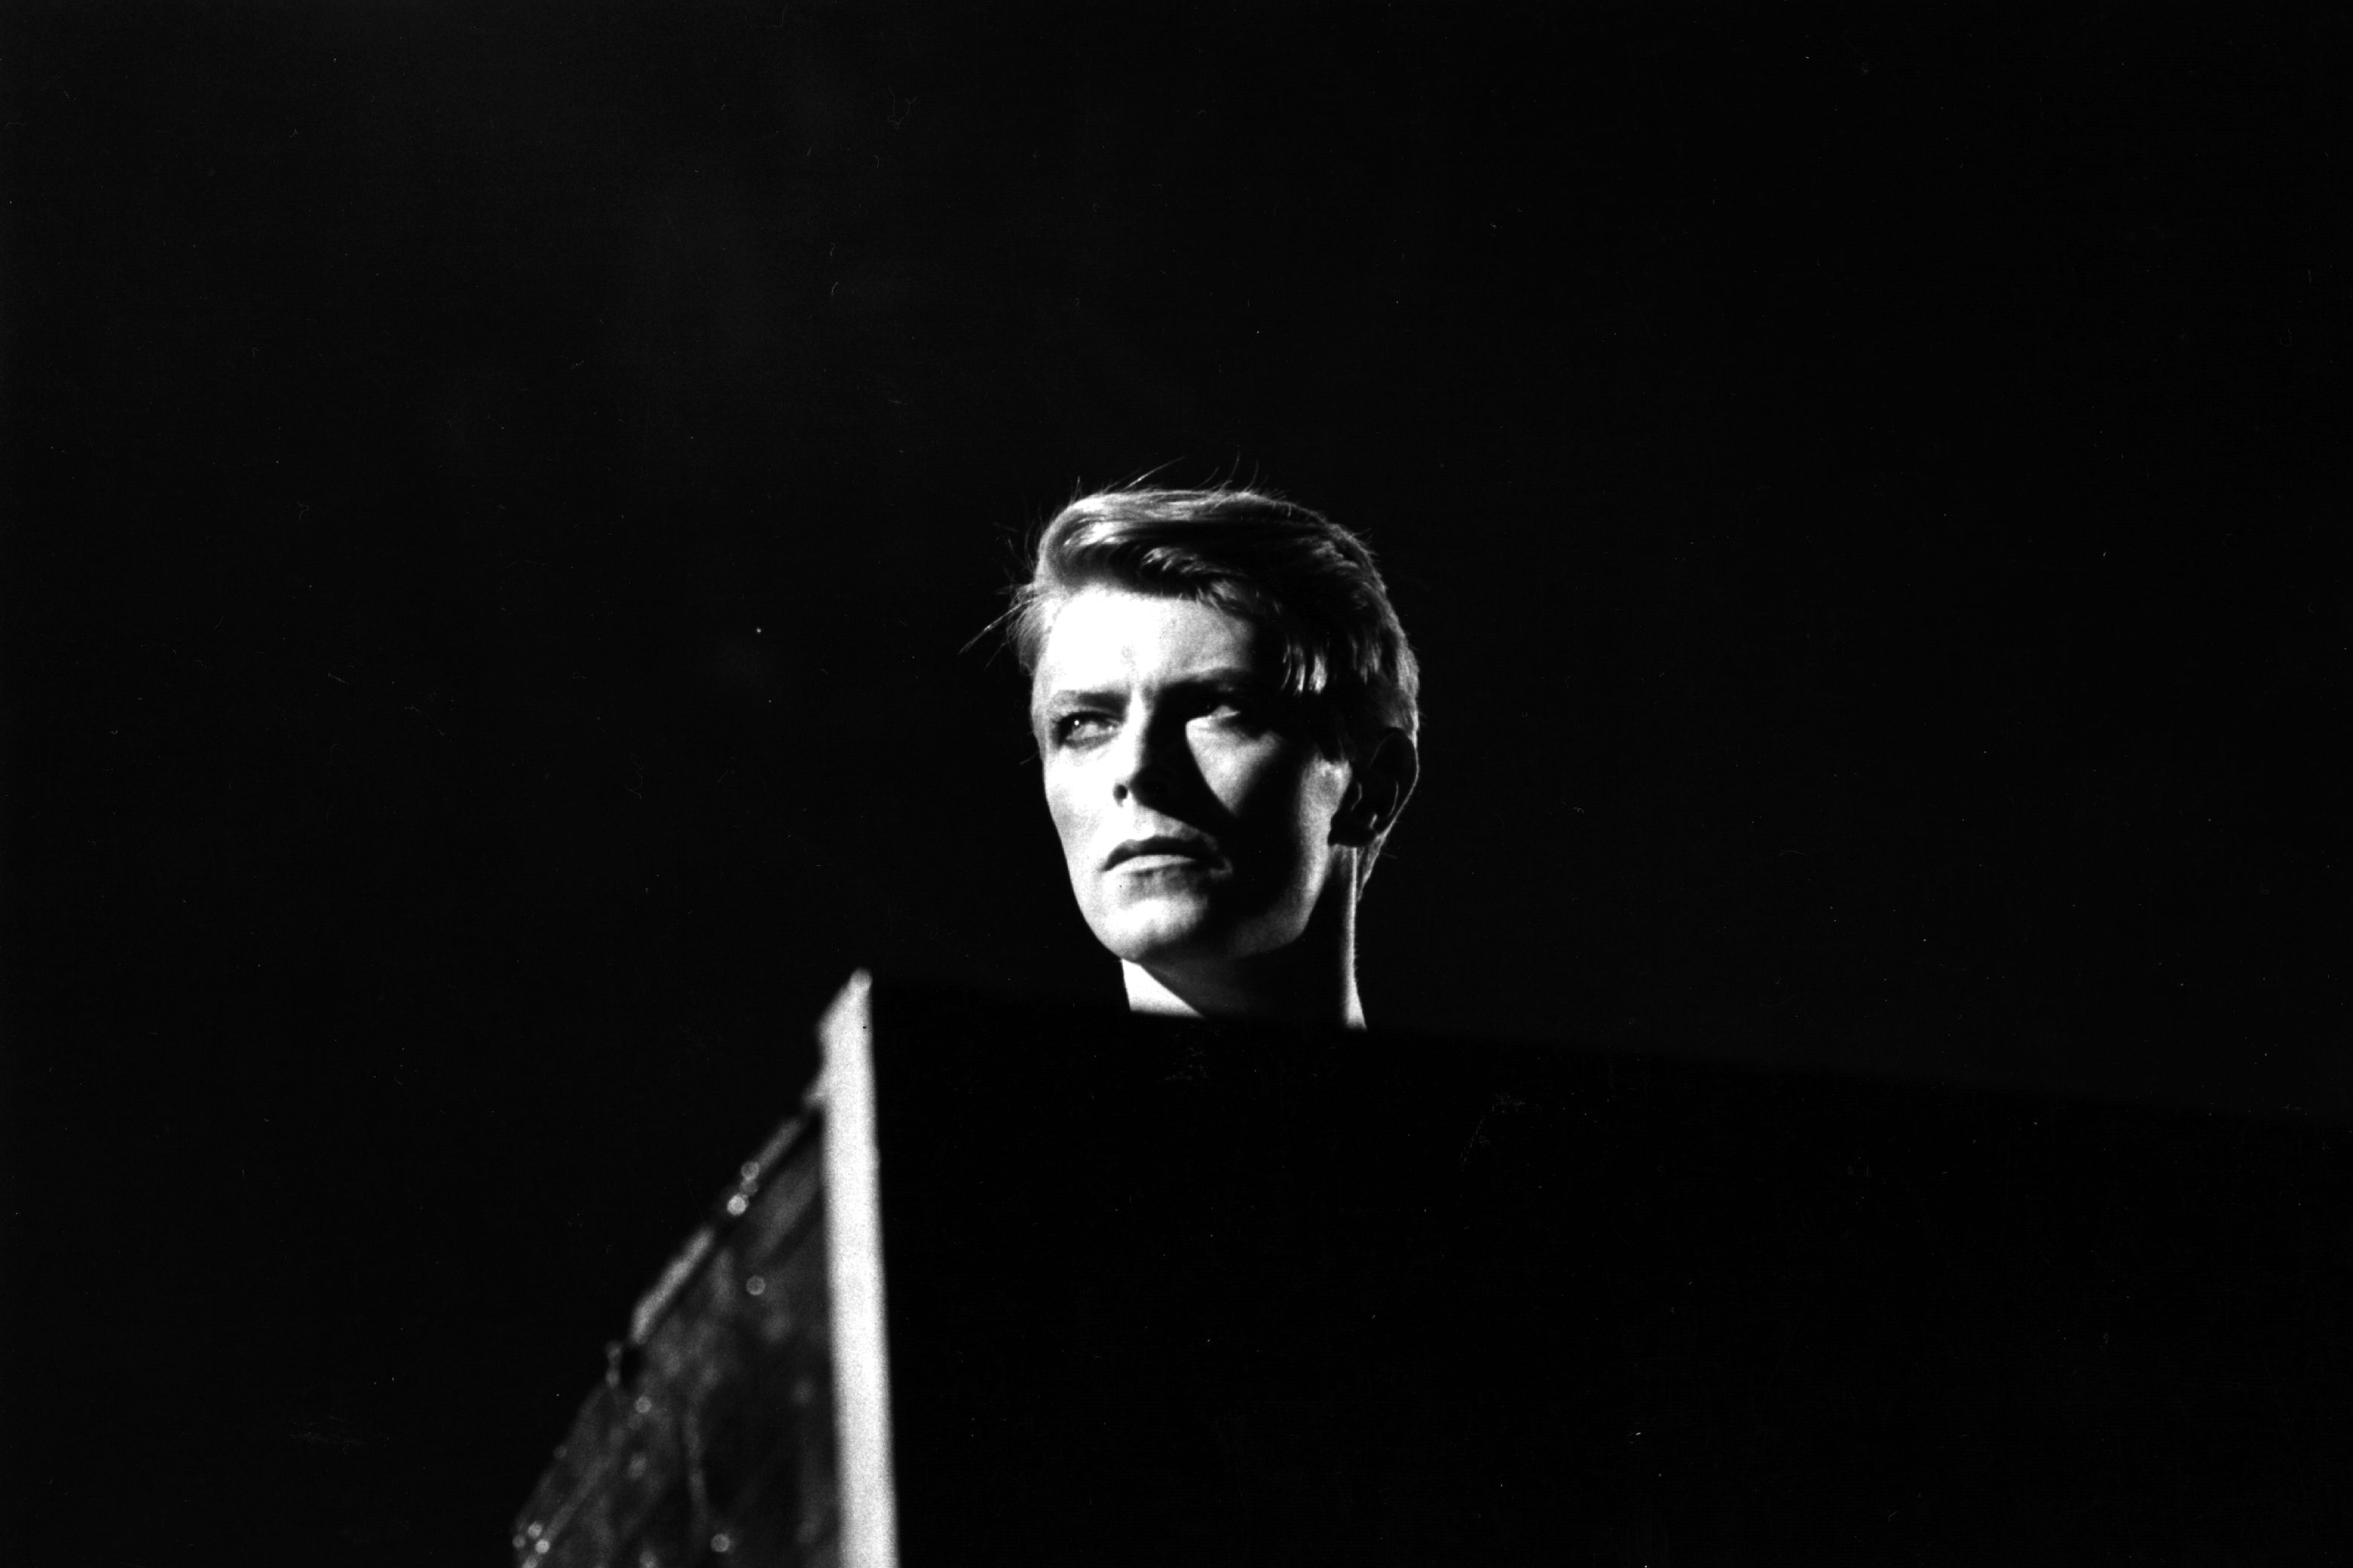 David Bowie's Filthy Lesson. The New Republic